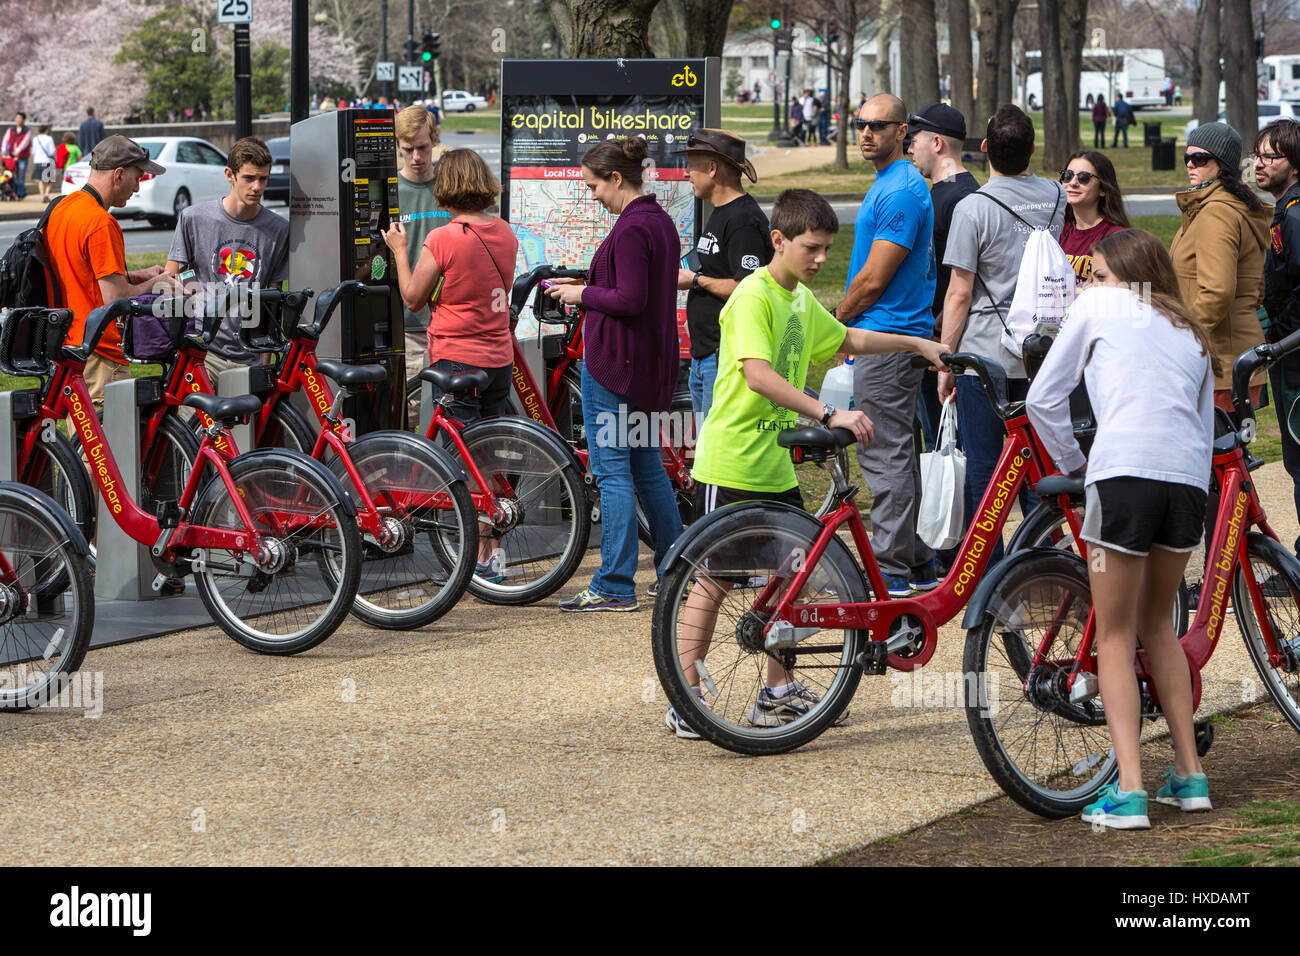 People rent bikes at a Capitol Bikeshare docking station in Washington, DC. Stock Photo